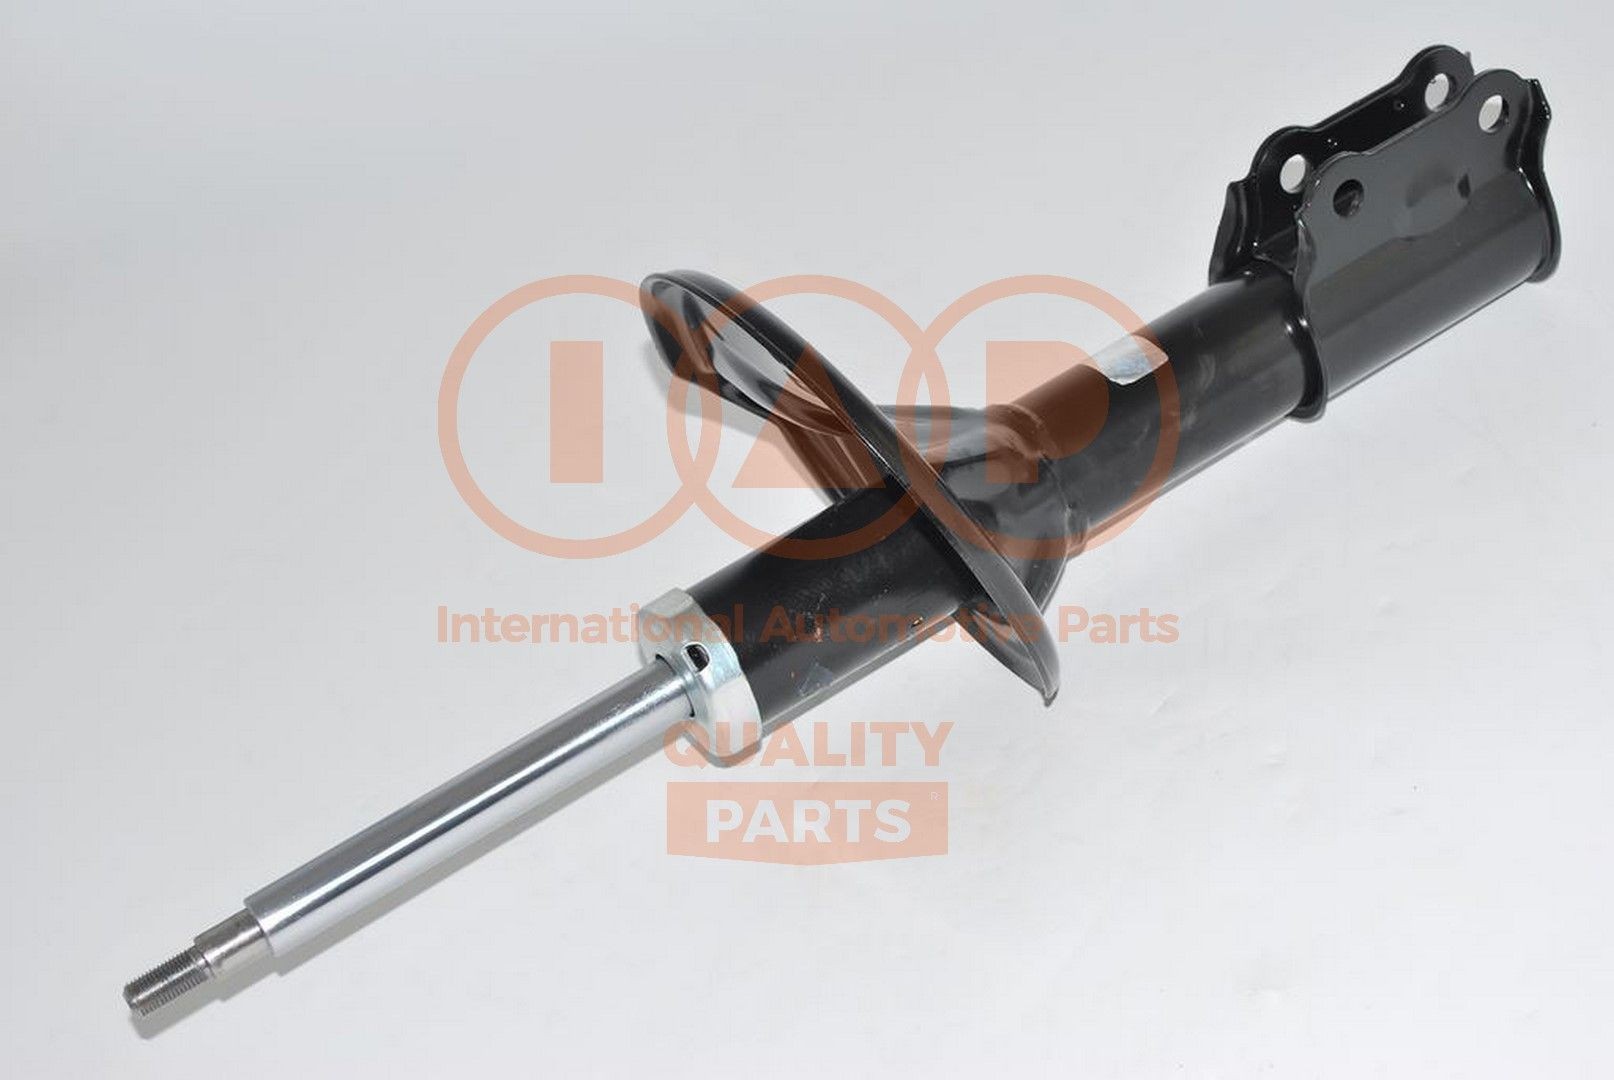 IAP QUALITY PARTS 504-07022A Shock absorber 5465028520